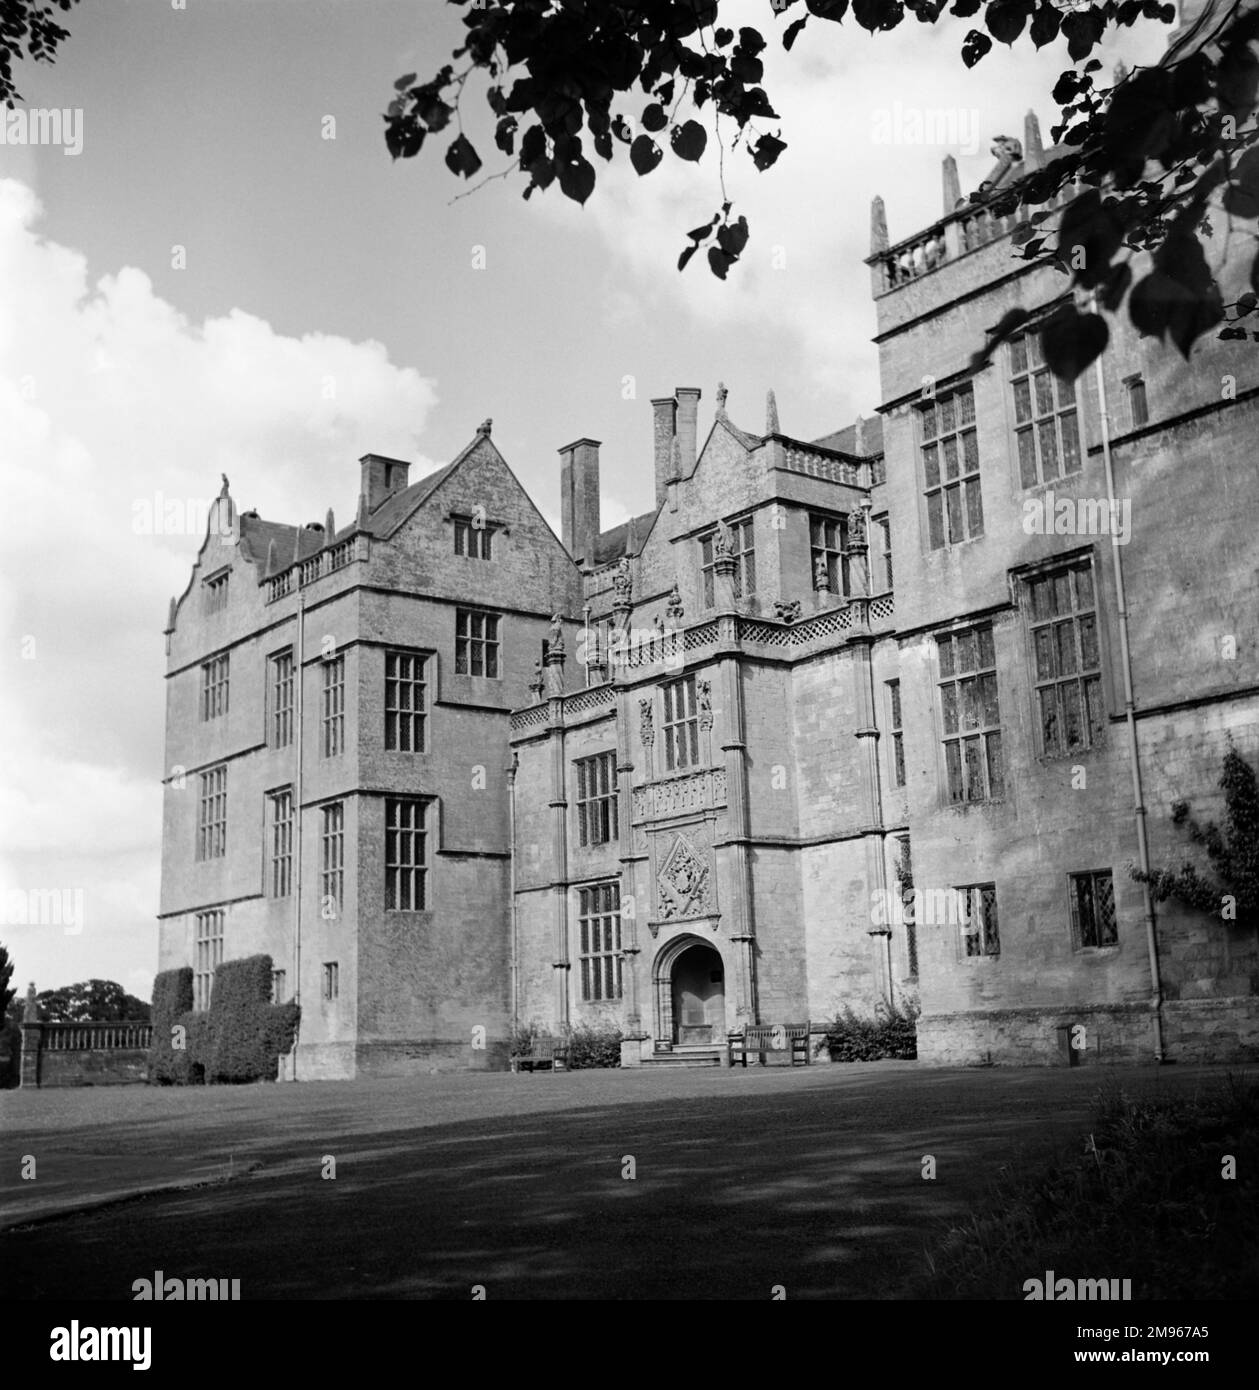 Montacute House, situated in the South Somerset village of Montacute. A fantastic example of late Elizabethan architecture The three floored mansion, constructed of local Ham Hill stone, was built circa 1598 by Sir Edward Phelips, Master of the Rolls to Queen Elizabeth I. Photograph by Norman Synge Waller Budd Stock Photo